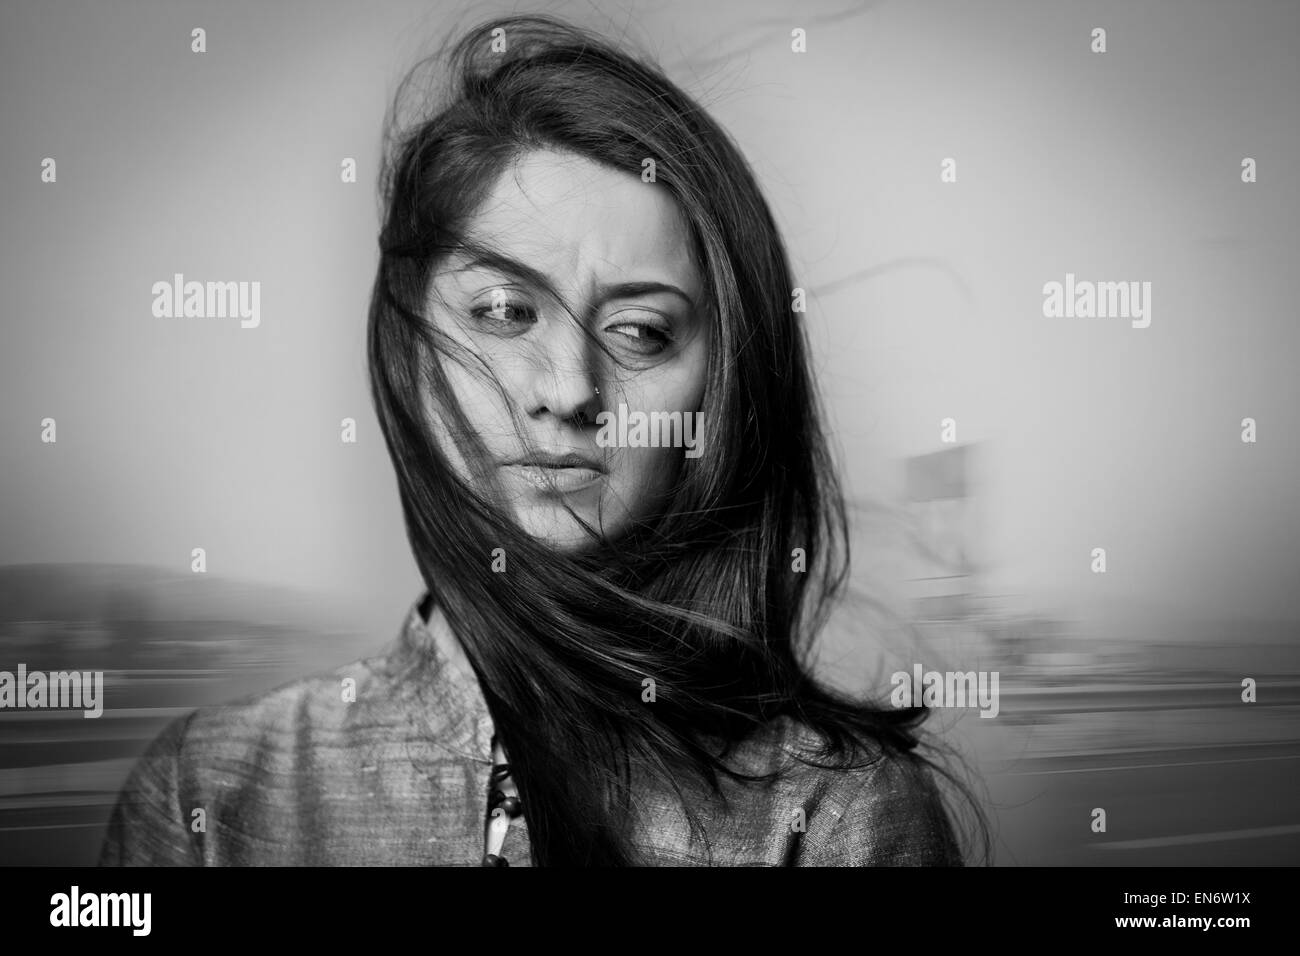 Portrait of a distressed woman Stock Photo